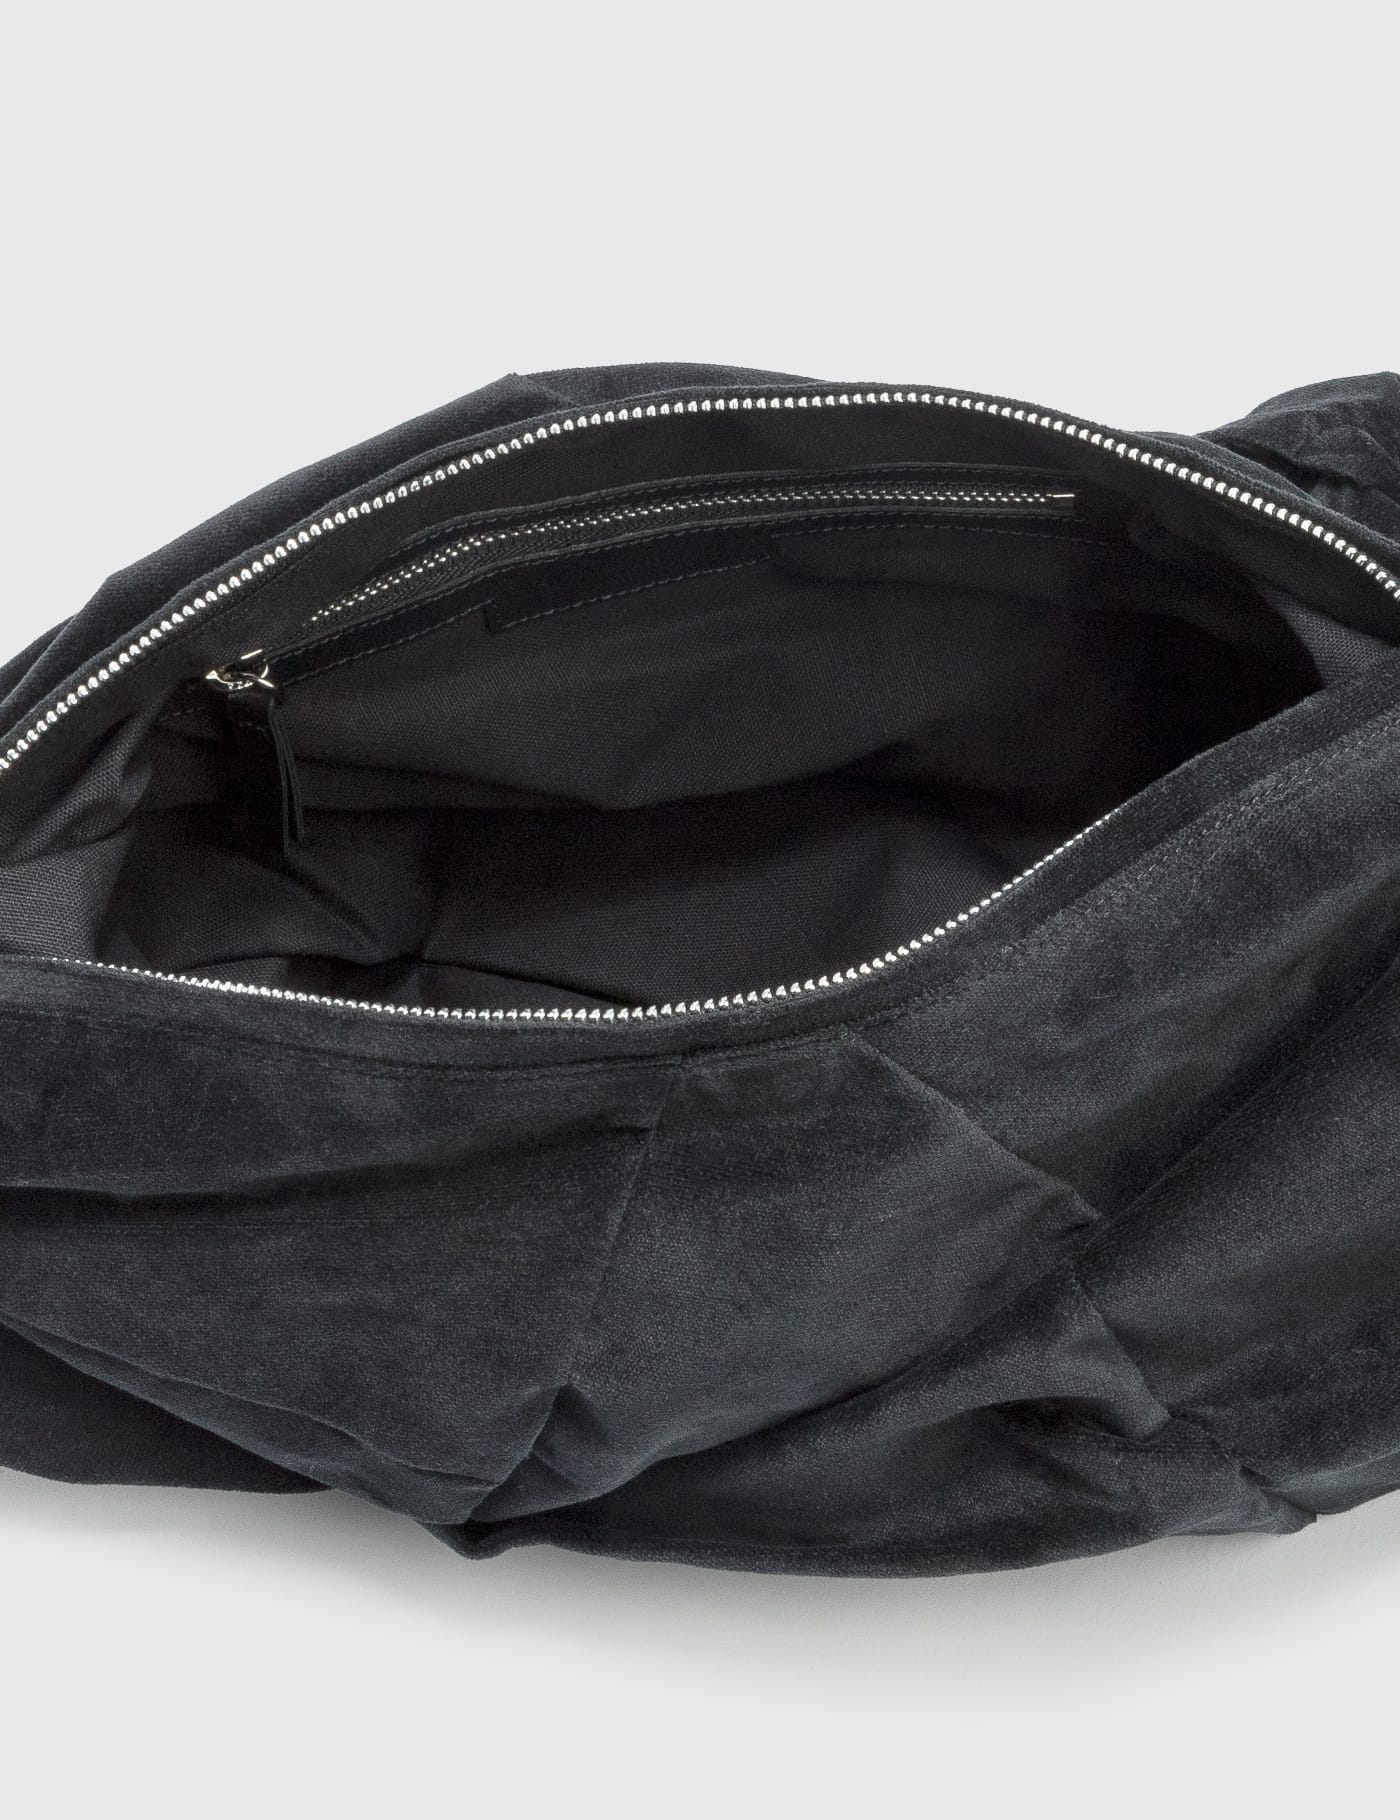 Low Classic - Knot Bag | HBX - Globally Curated Fashion and Lifestyle by  Hypebeast